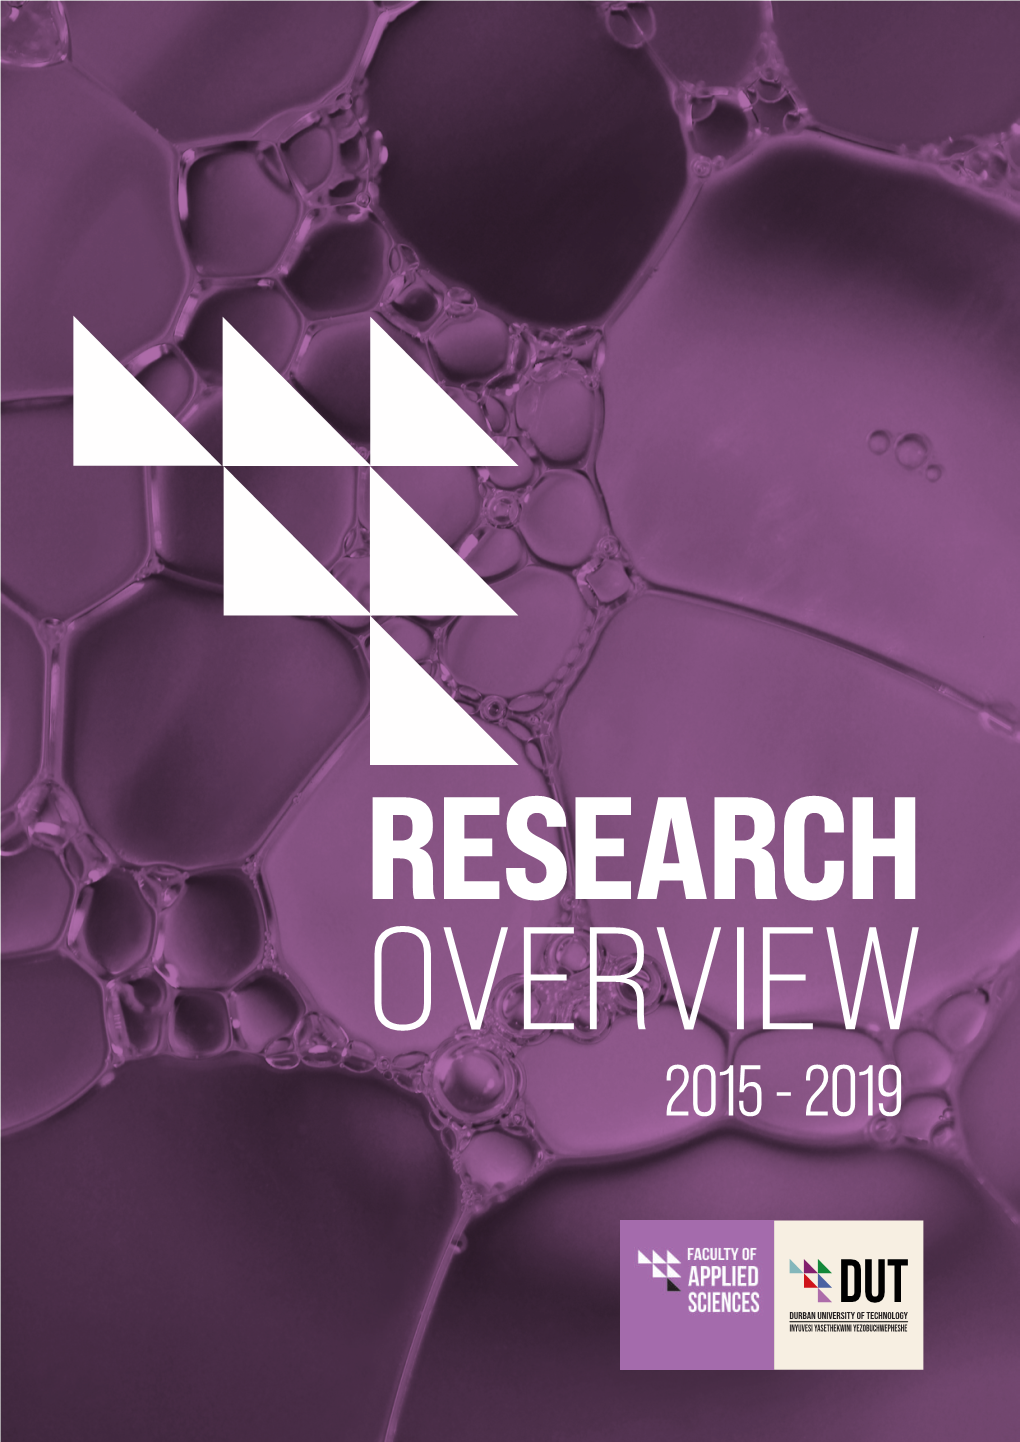 Research Updates and Highlights